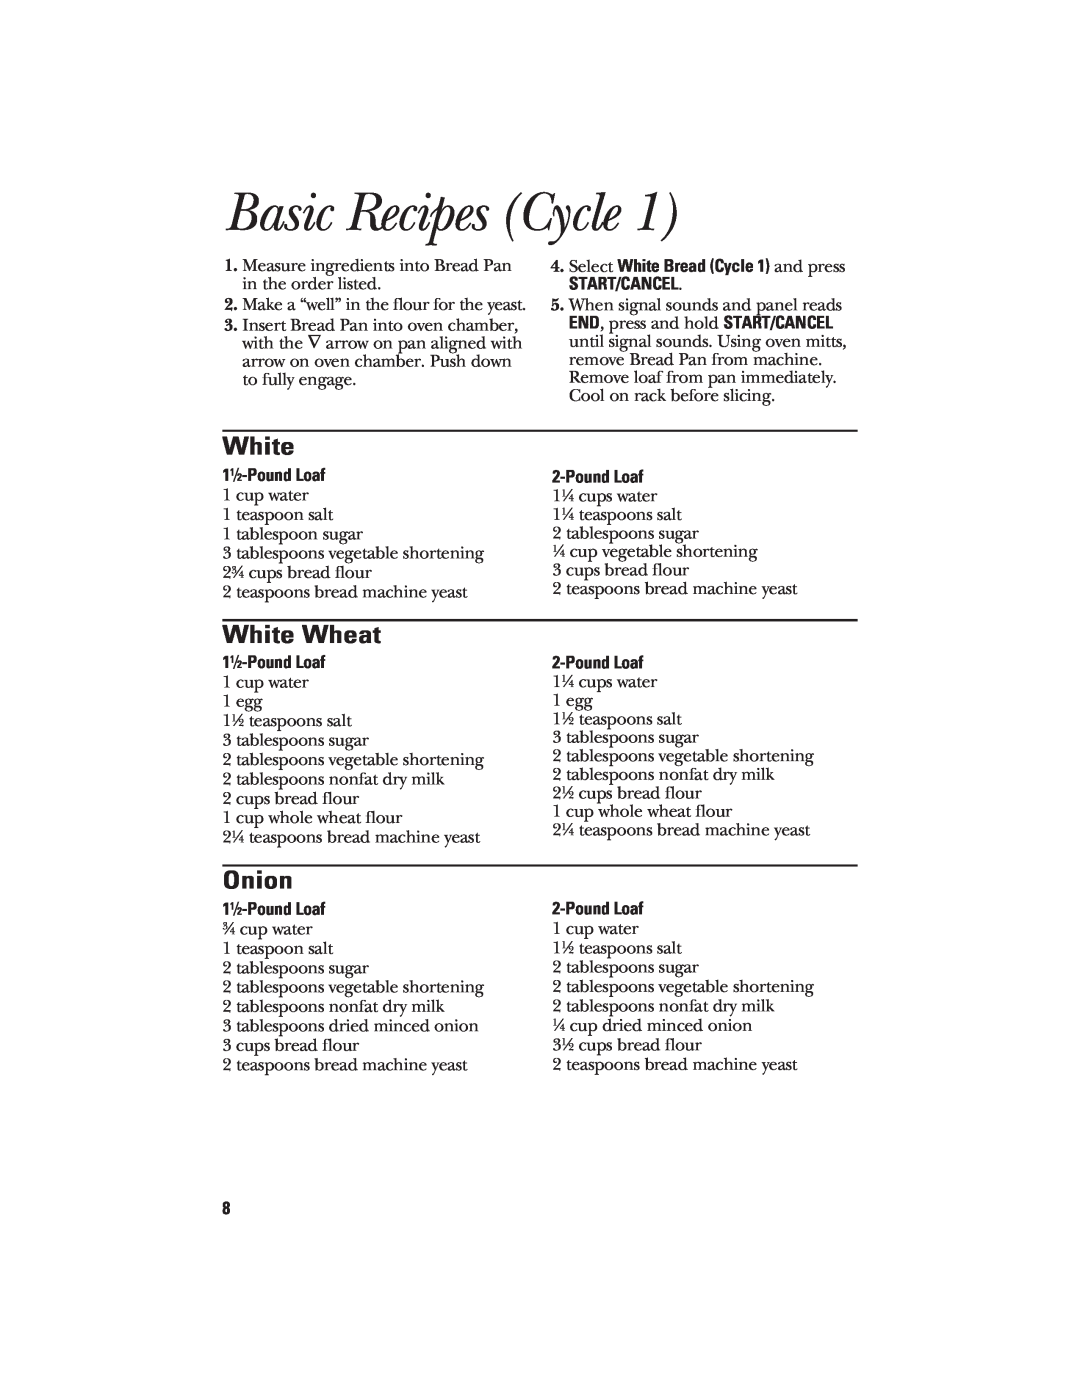 GE 840081500 Basic Recipes Cycle, White Wheat, Onion, Select White Bread Cycle 1 and press START/CANCEL, Pound Loaf 